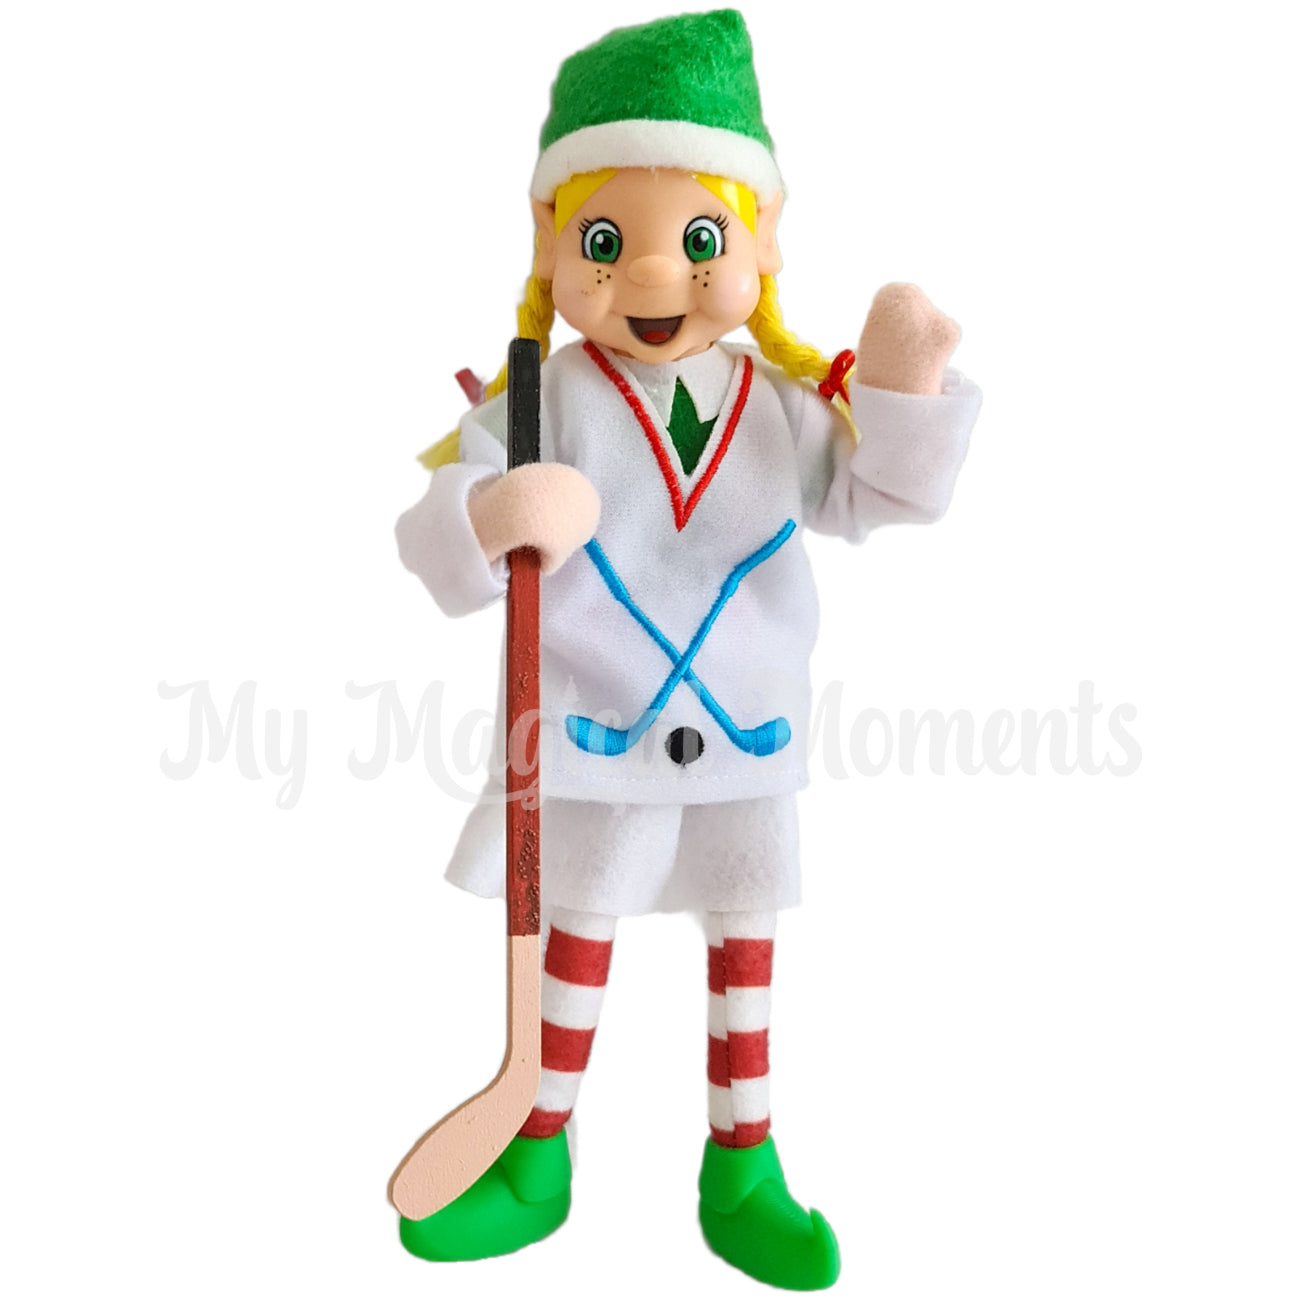 Elf wearing hockey outfit